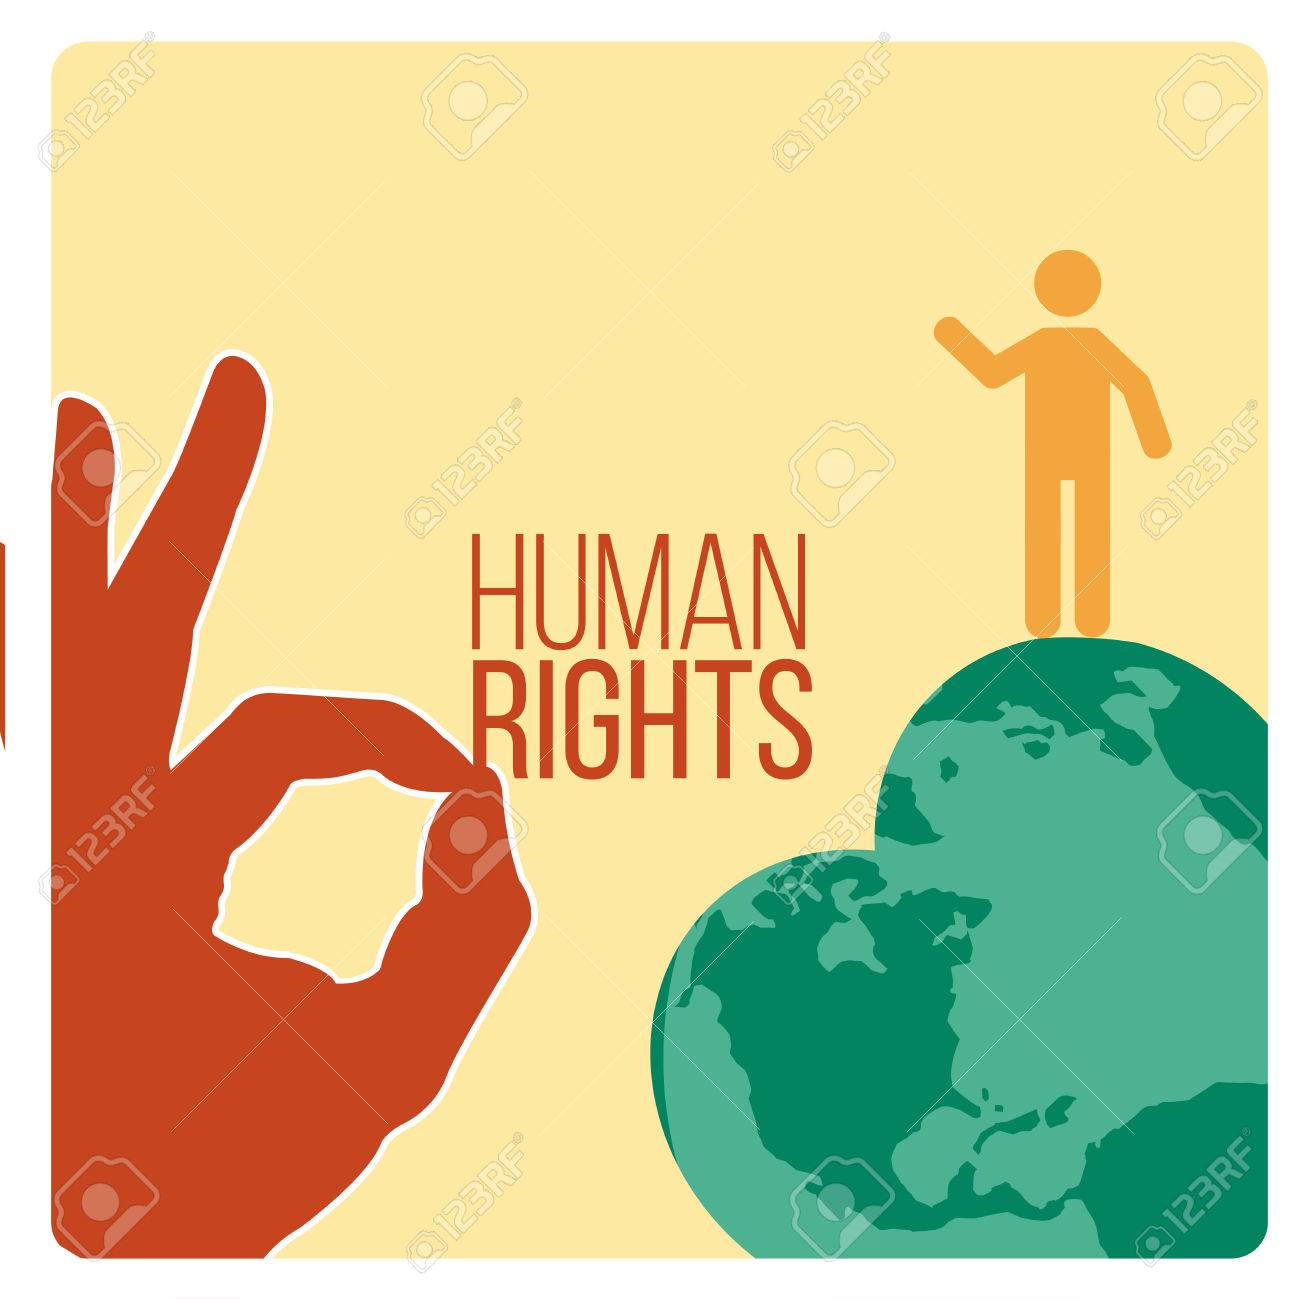 Human Rights Design Over Yellow Color Background Royalty